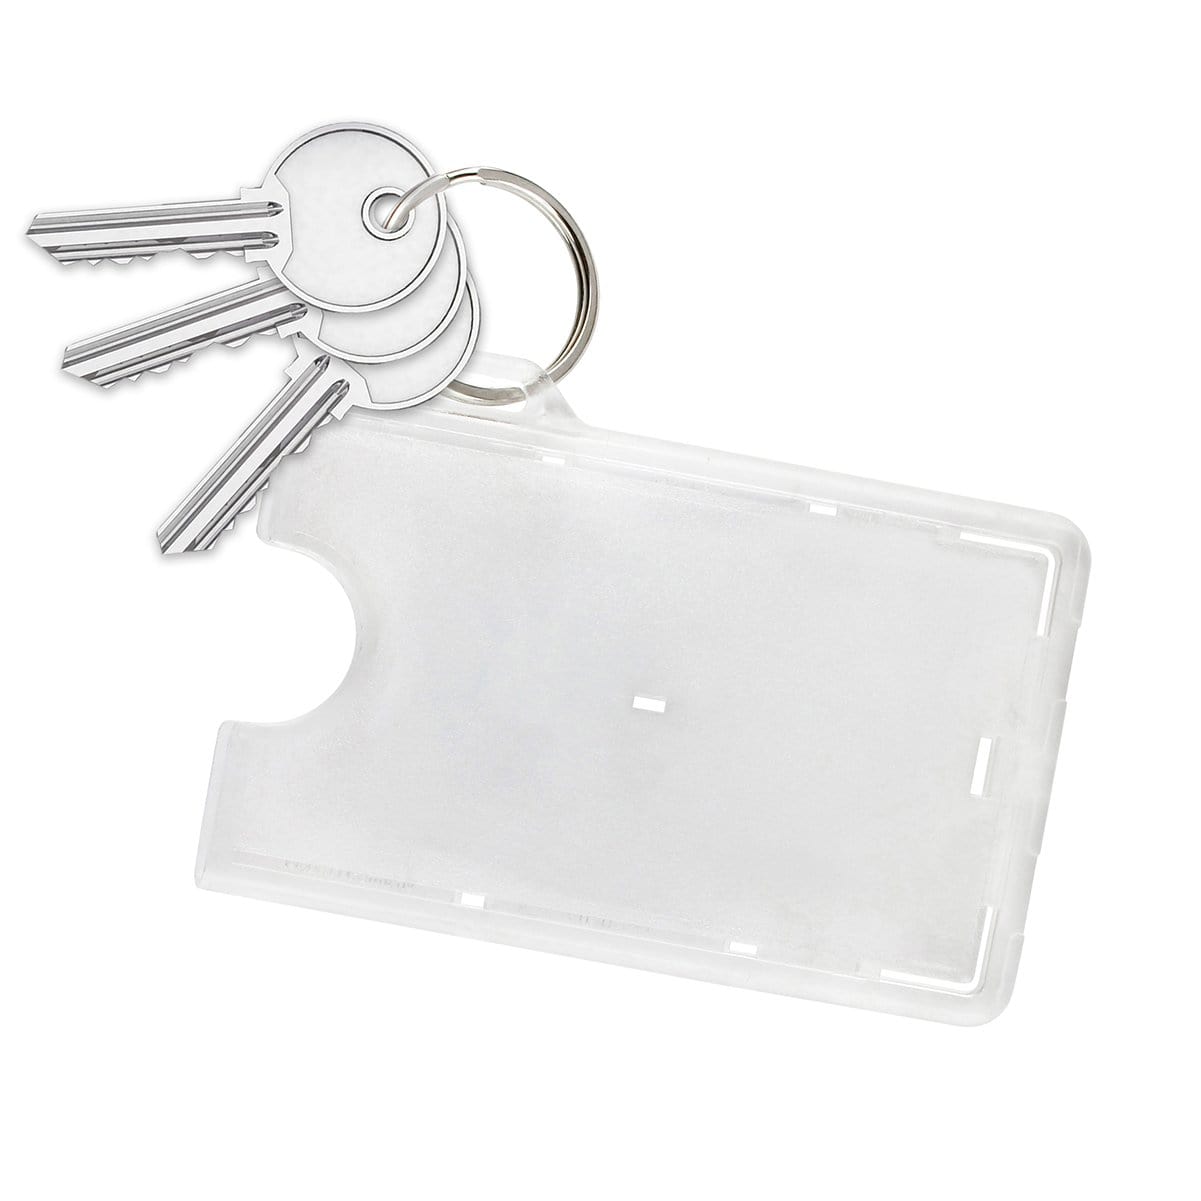 SPID Secure Fuel Card Holder with Key Ring (SPID-FUELCARD-RNG-C) SPID-FUELCARD-RNG-C